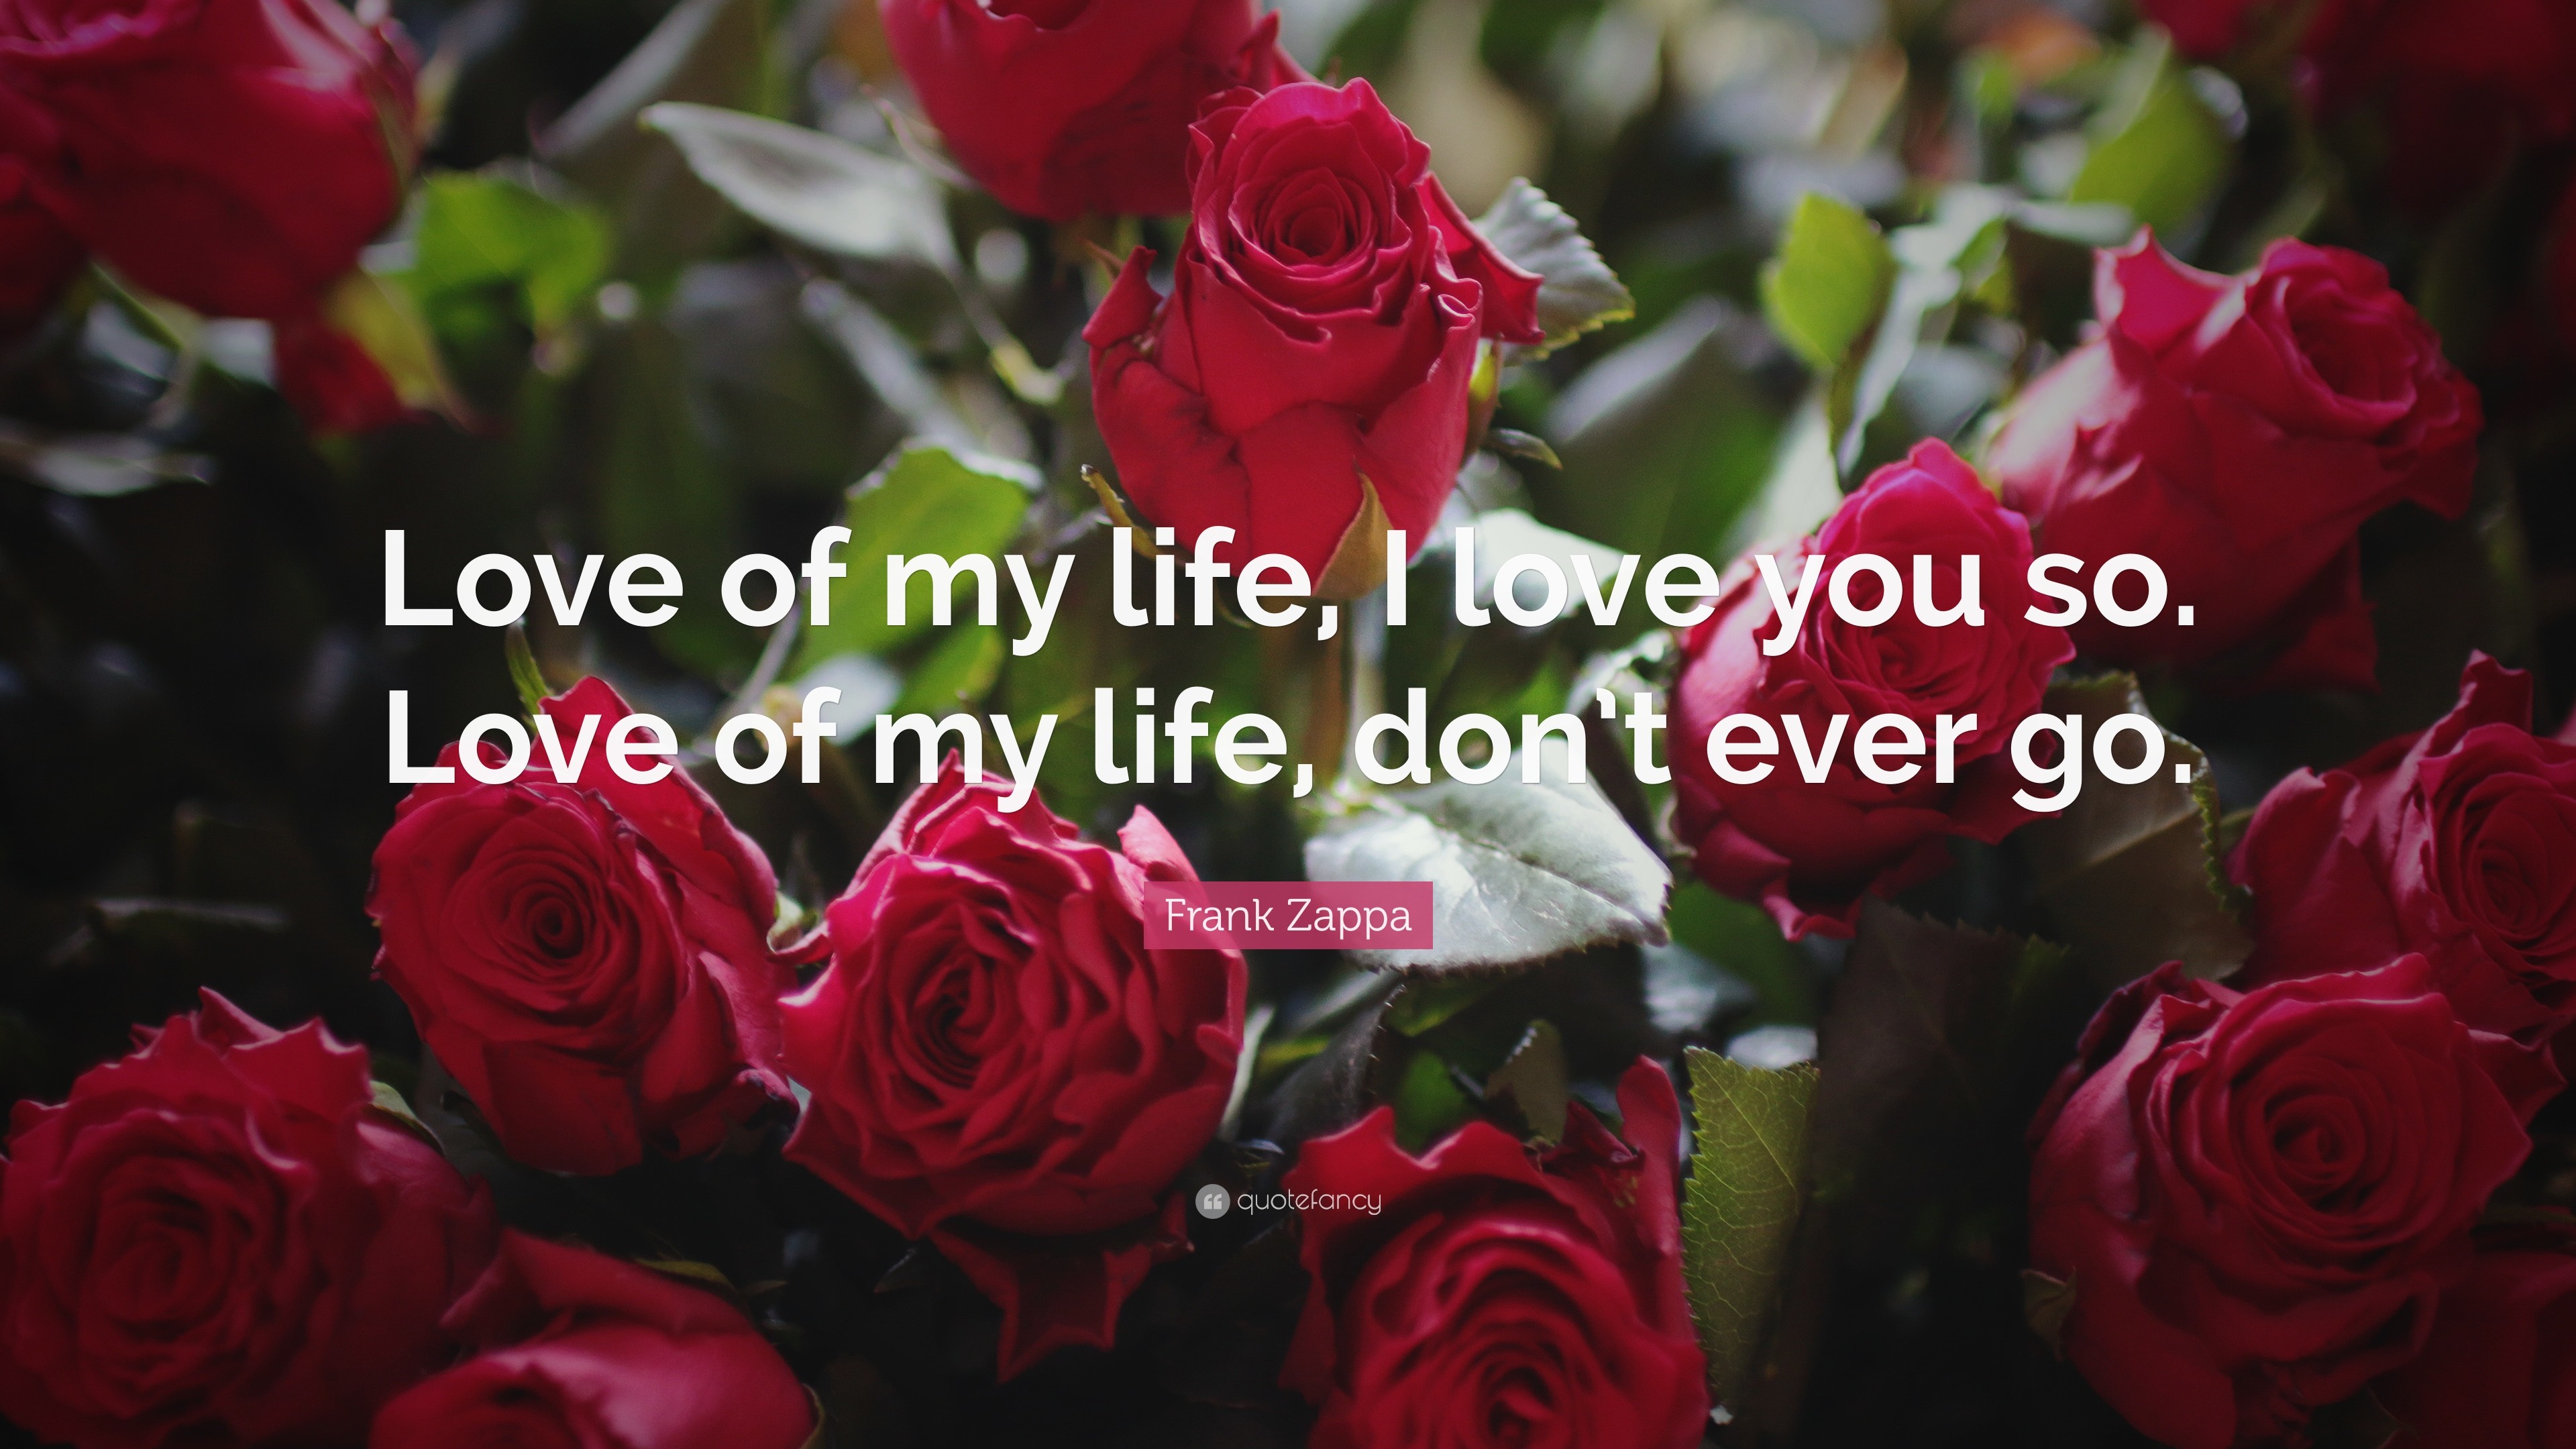 Love You Quotes: “Love of my life, I love you so. Love